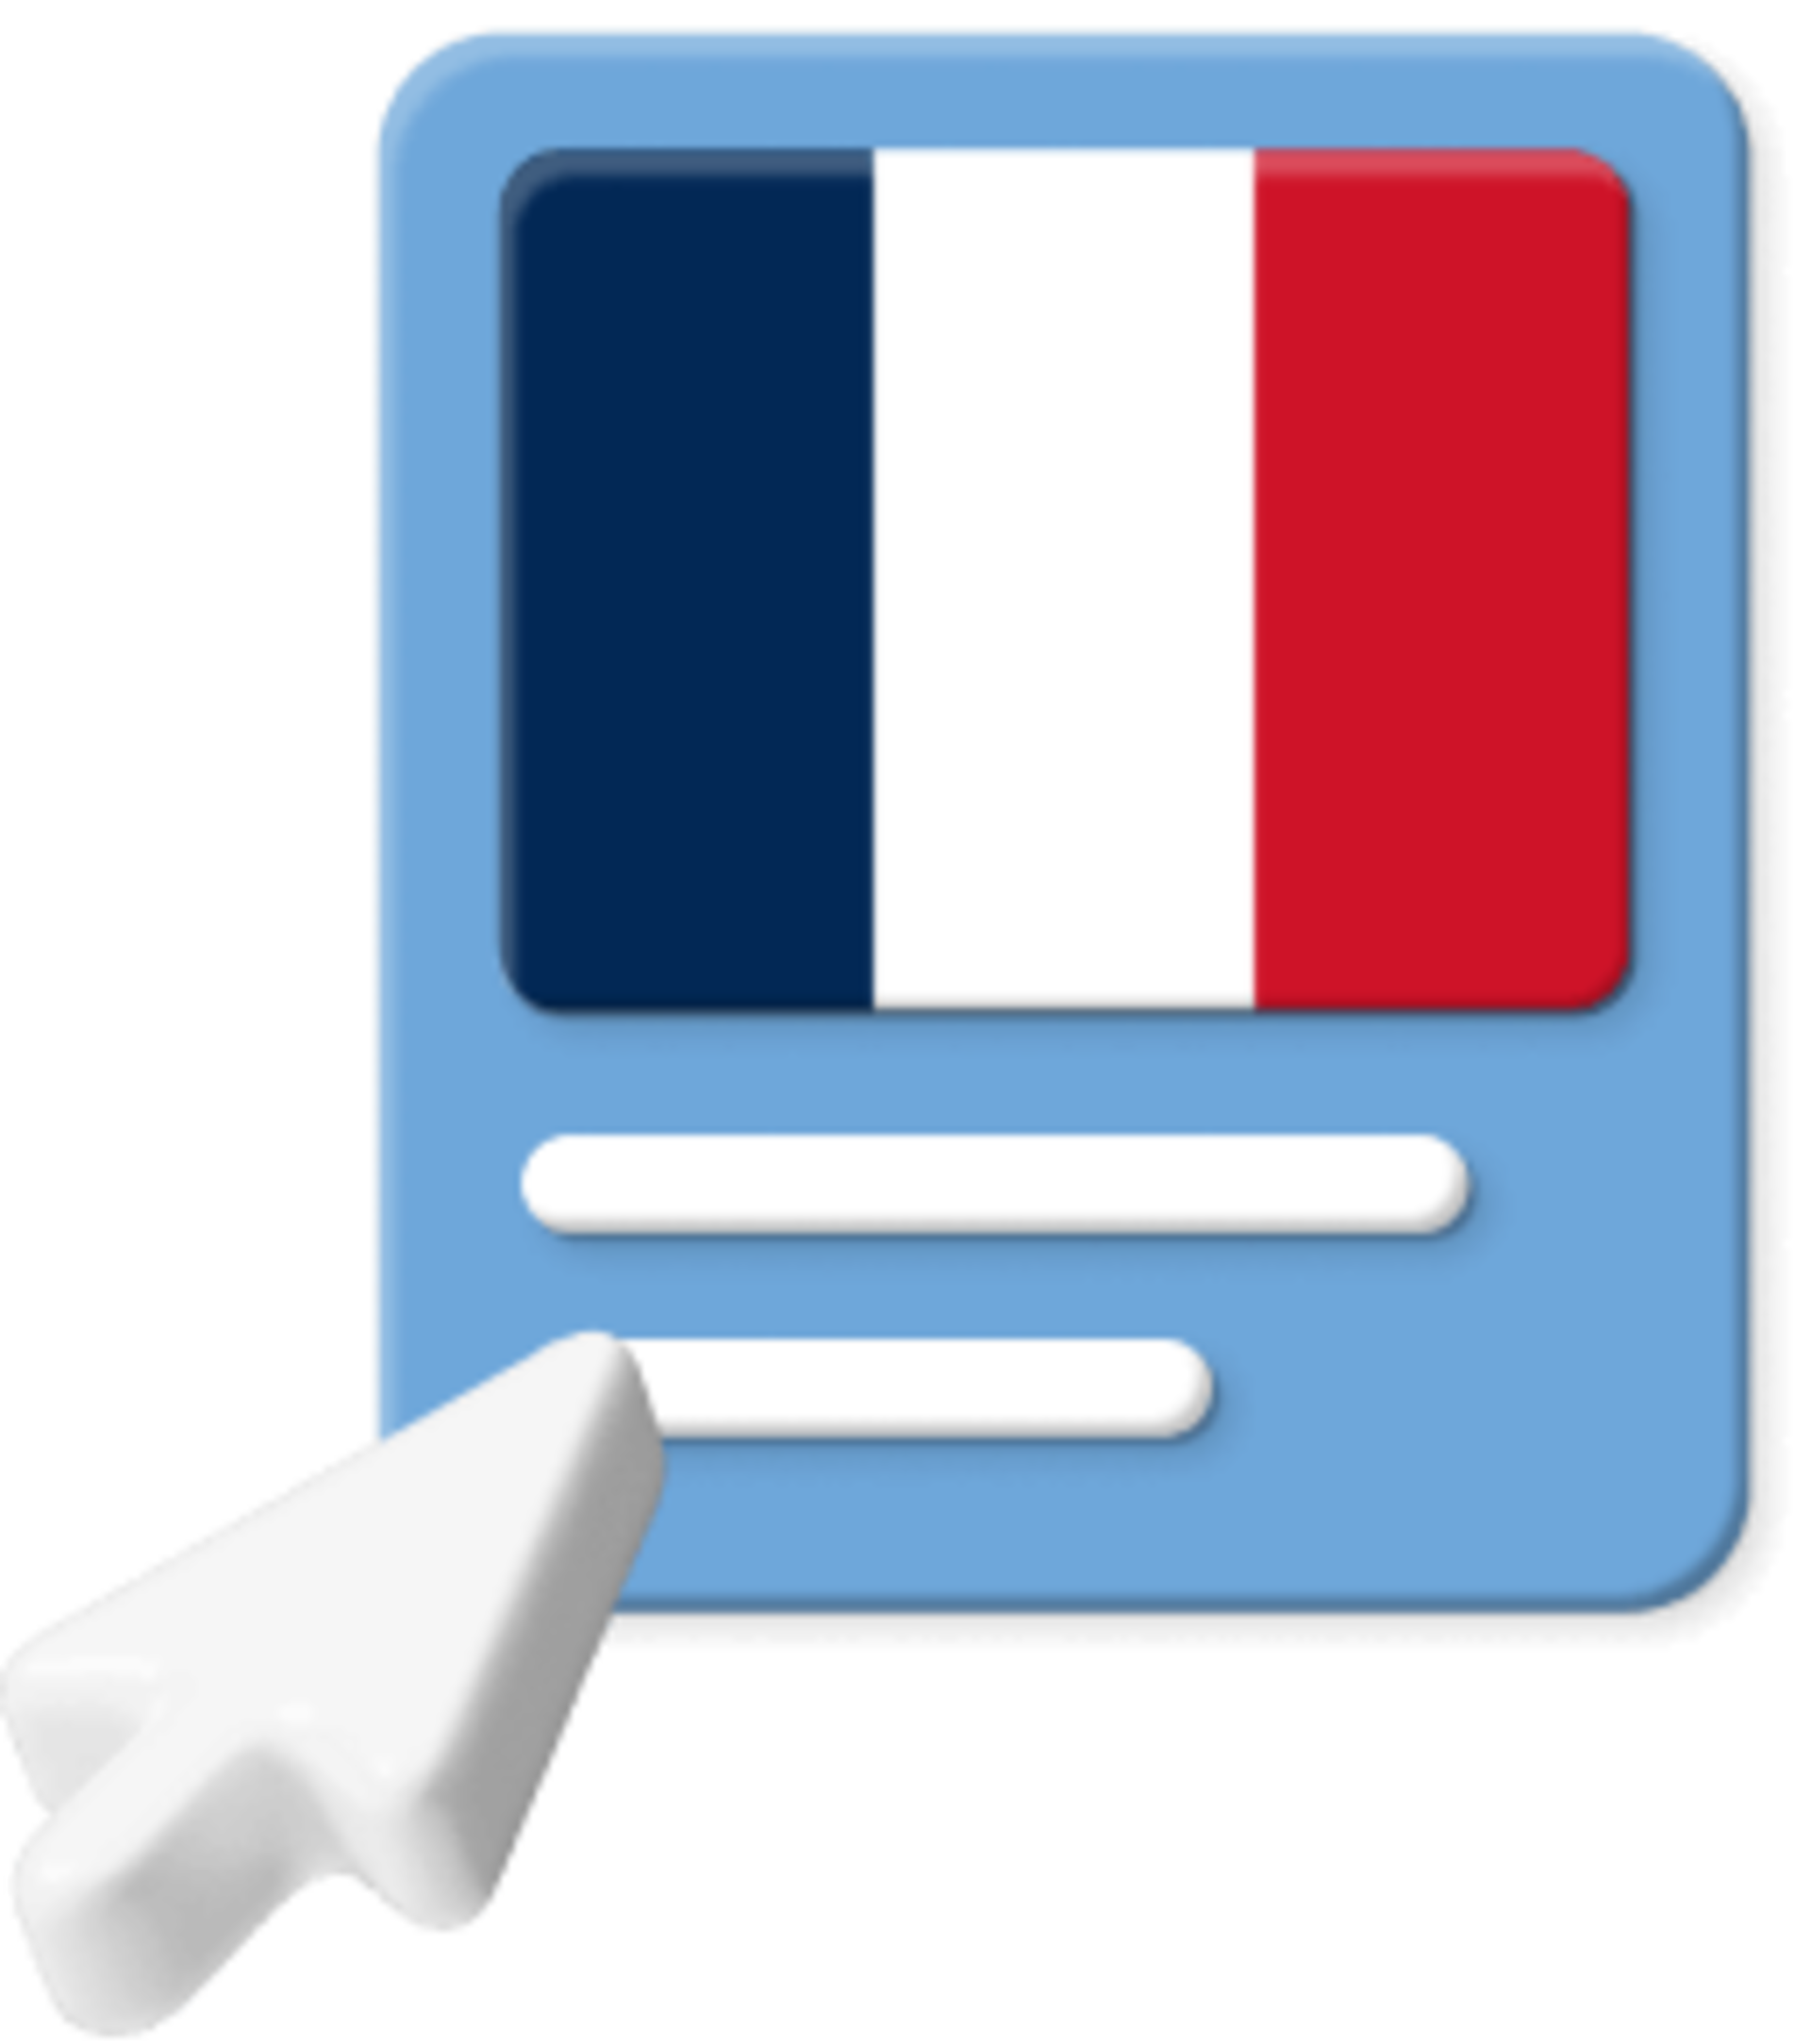 French flag with pointer